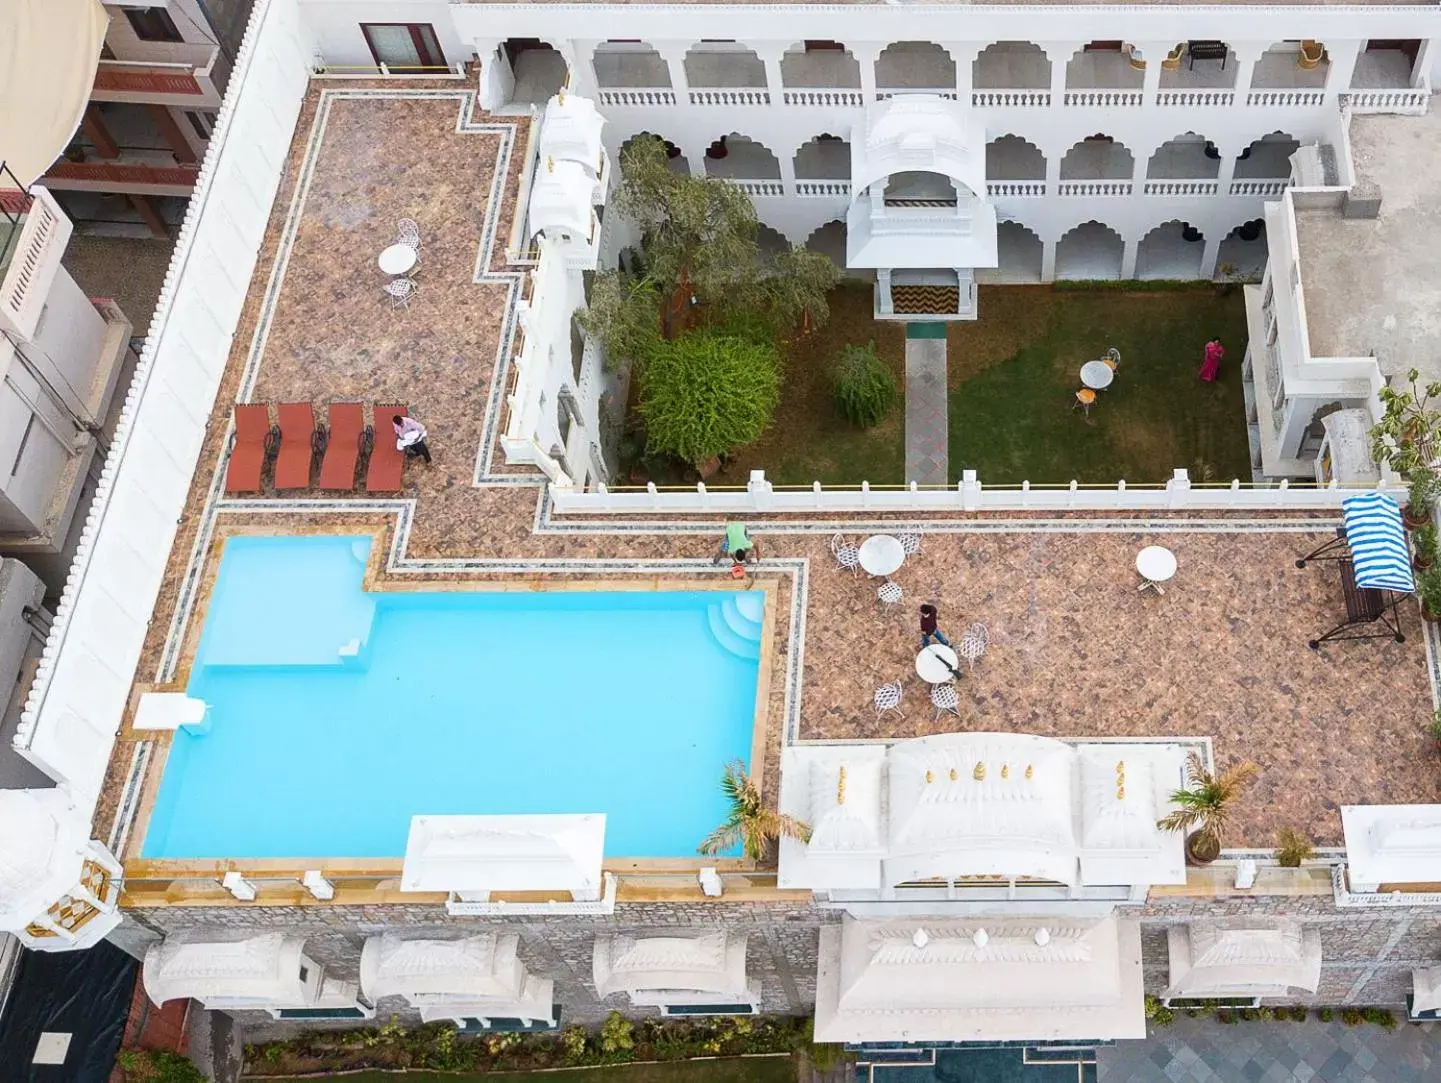 Property building, Pool View in Hotel Rajasthan Palace